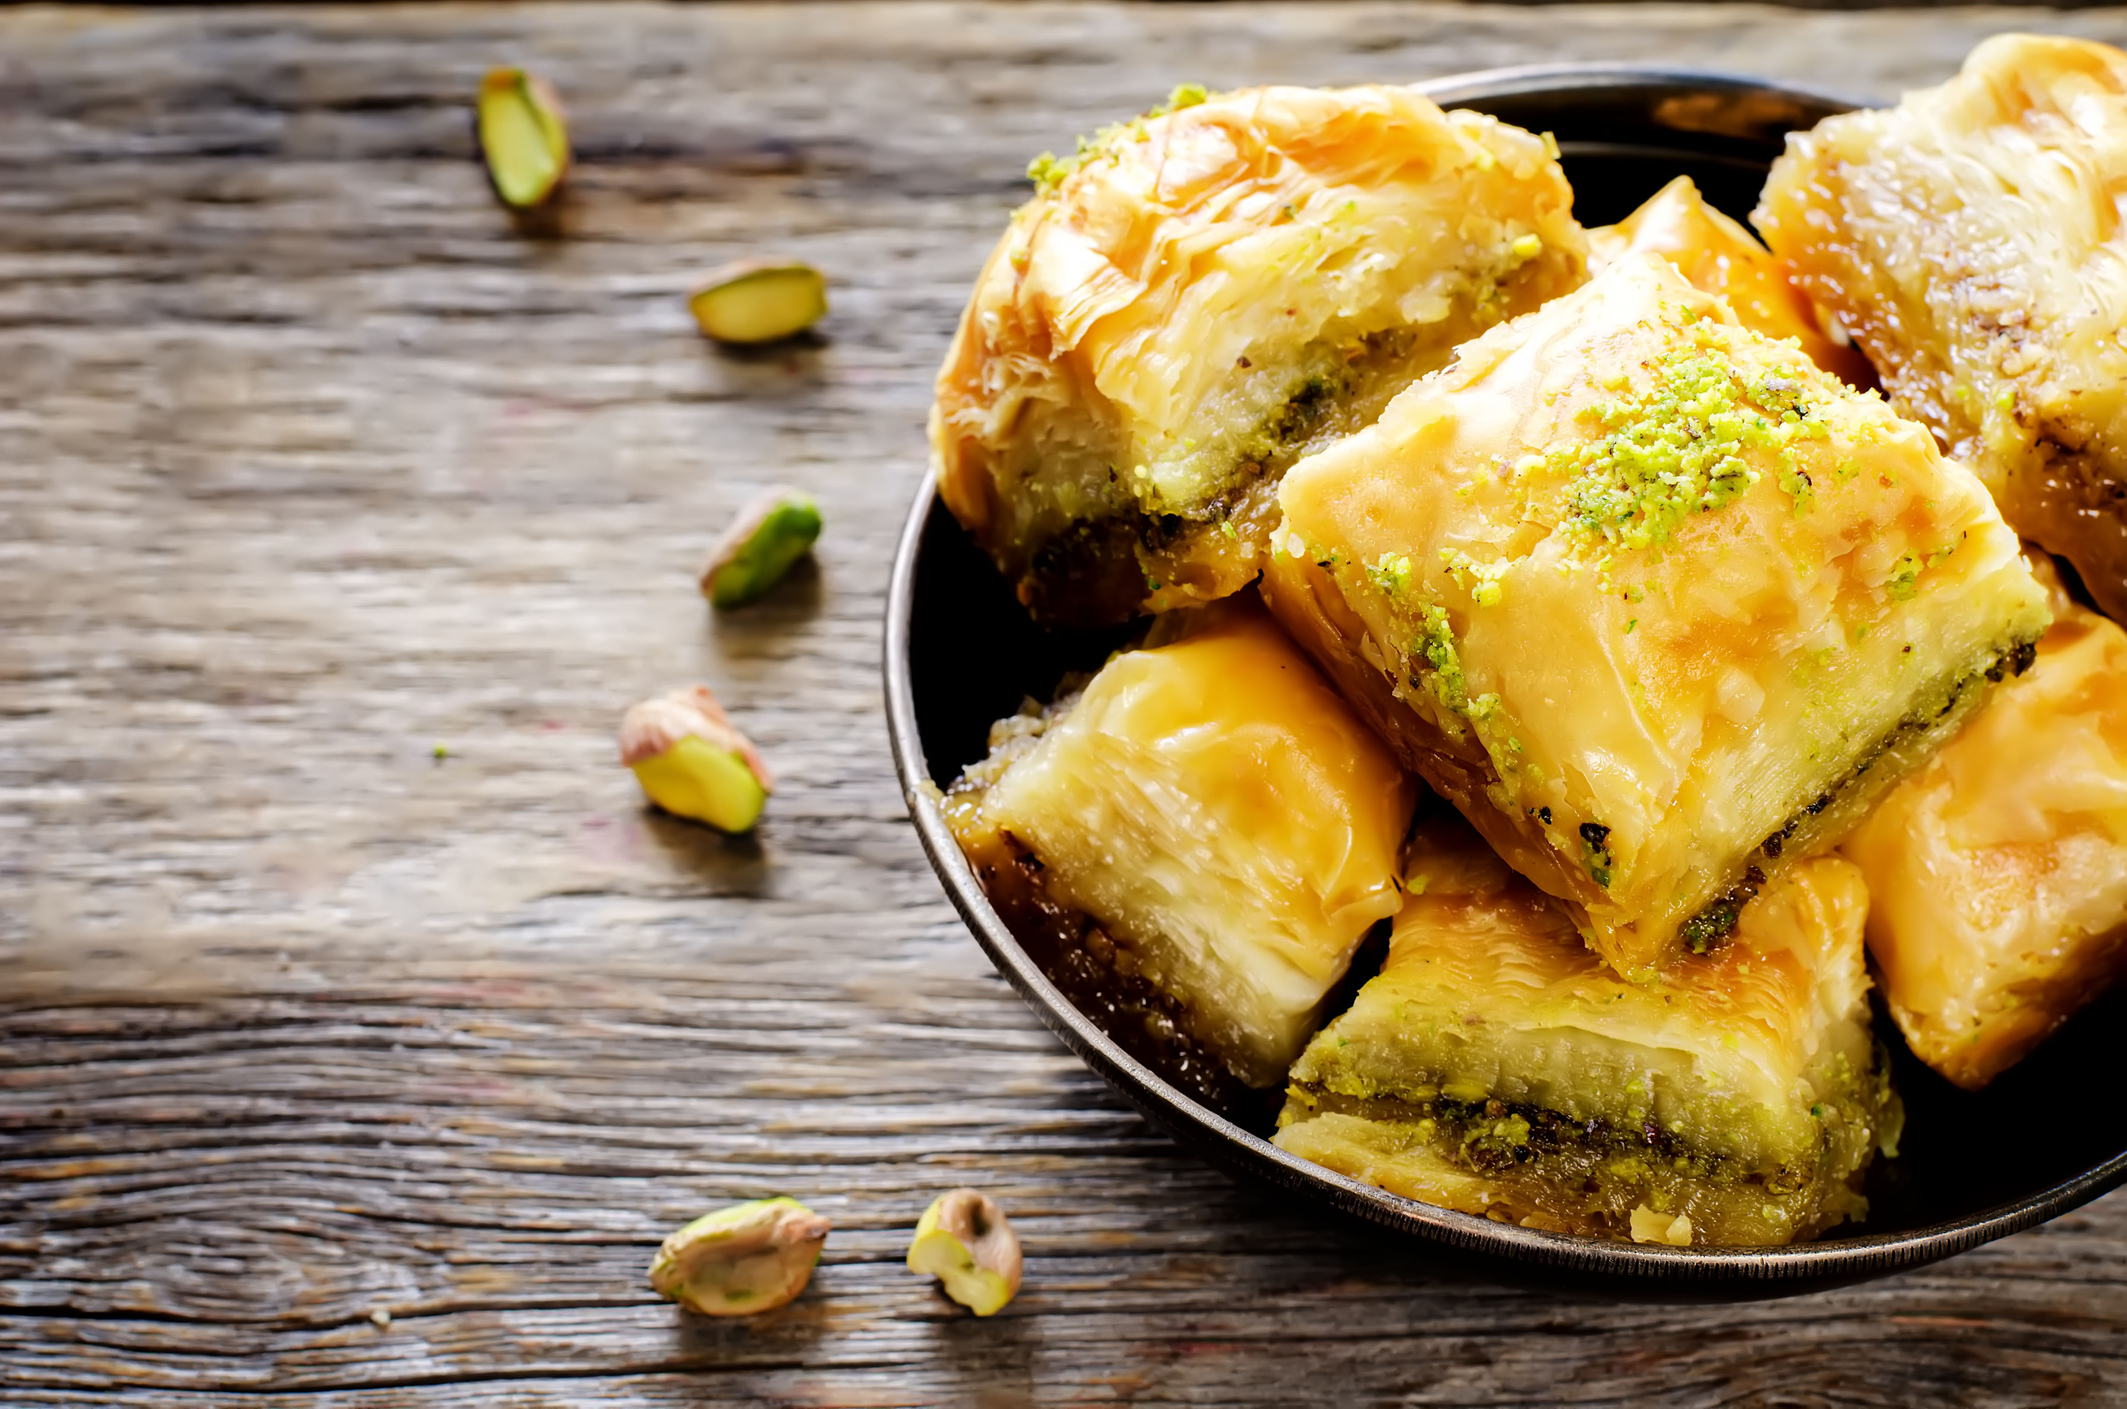 Getty Images - Baklava